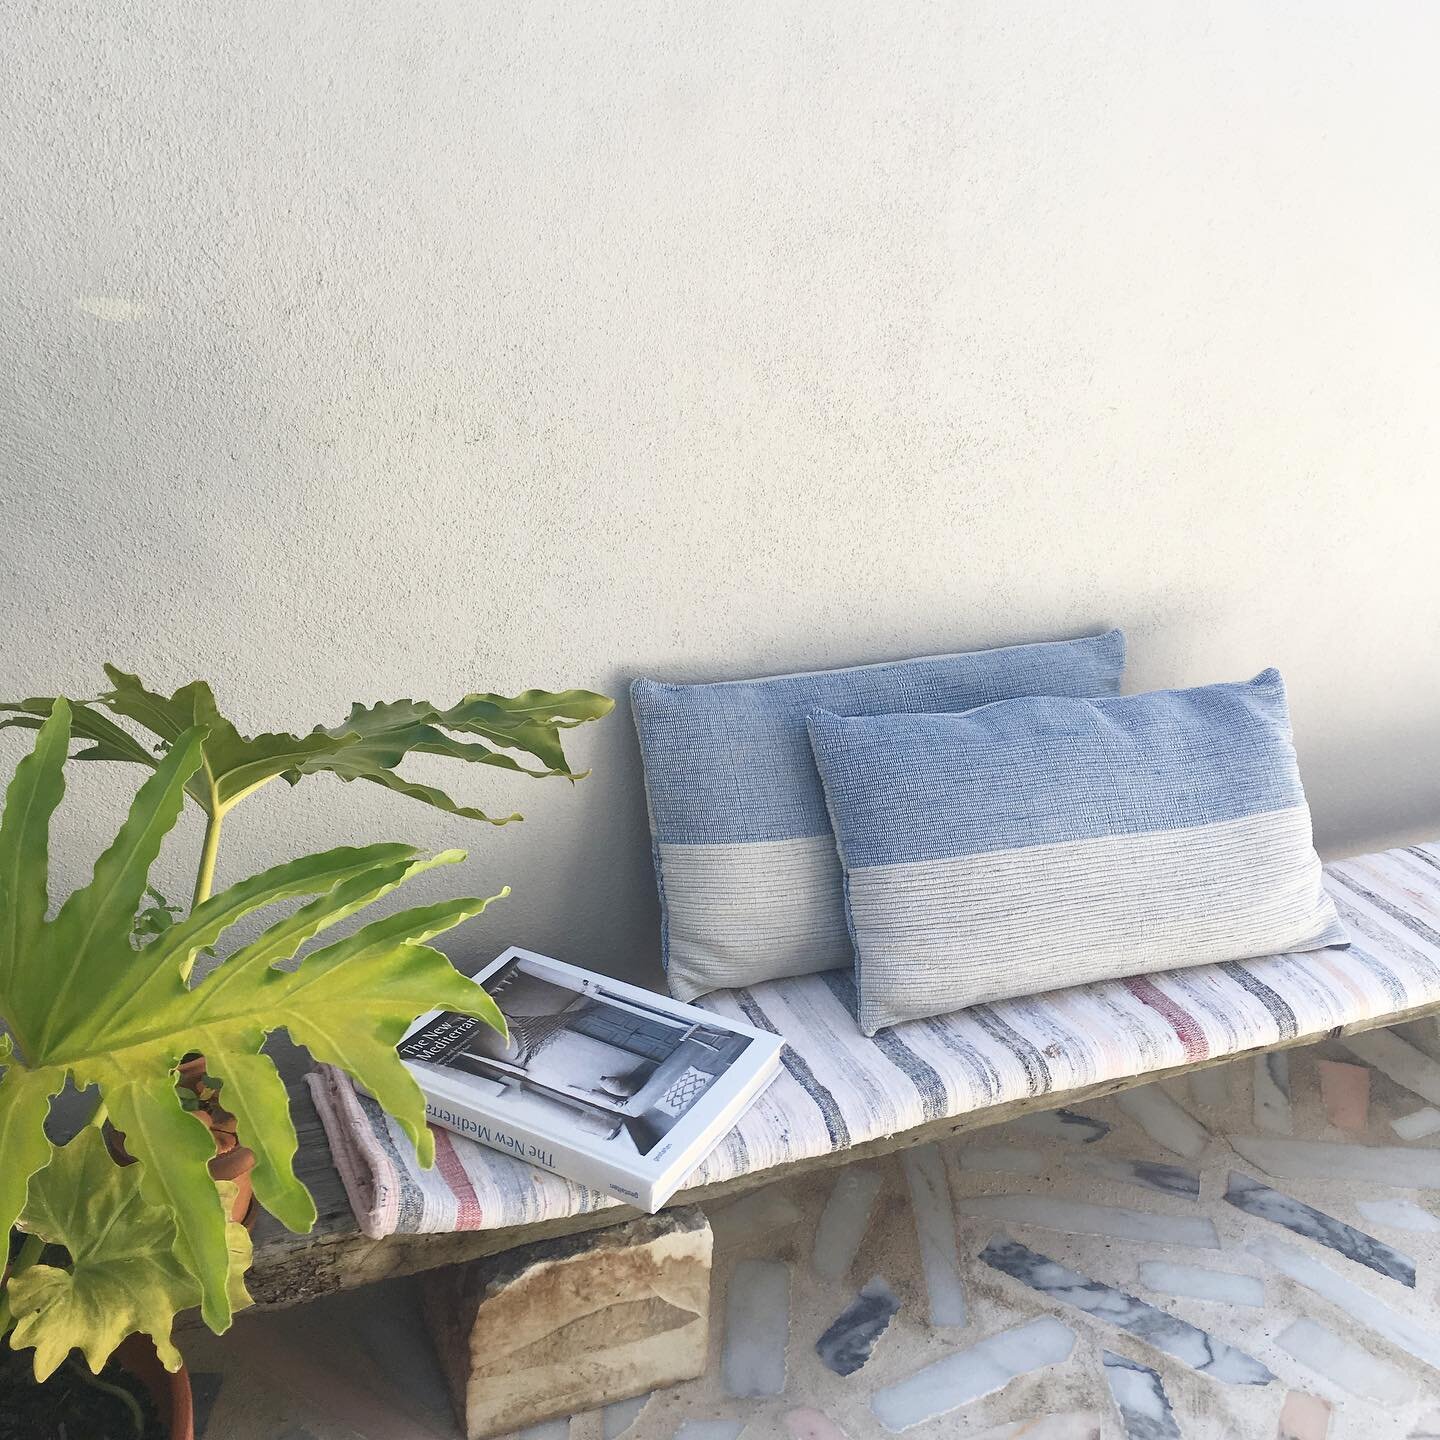 About old / new legacy. We love to make customize products for special clients 💕 summer vibes #pillows #rethink #zerowaste #noplastic #recycling #reuse #sustainability #climetchange #reuse #zerowaste #newconscience #thereisnoplanetb #specialedition 